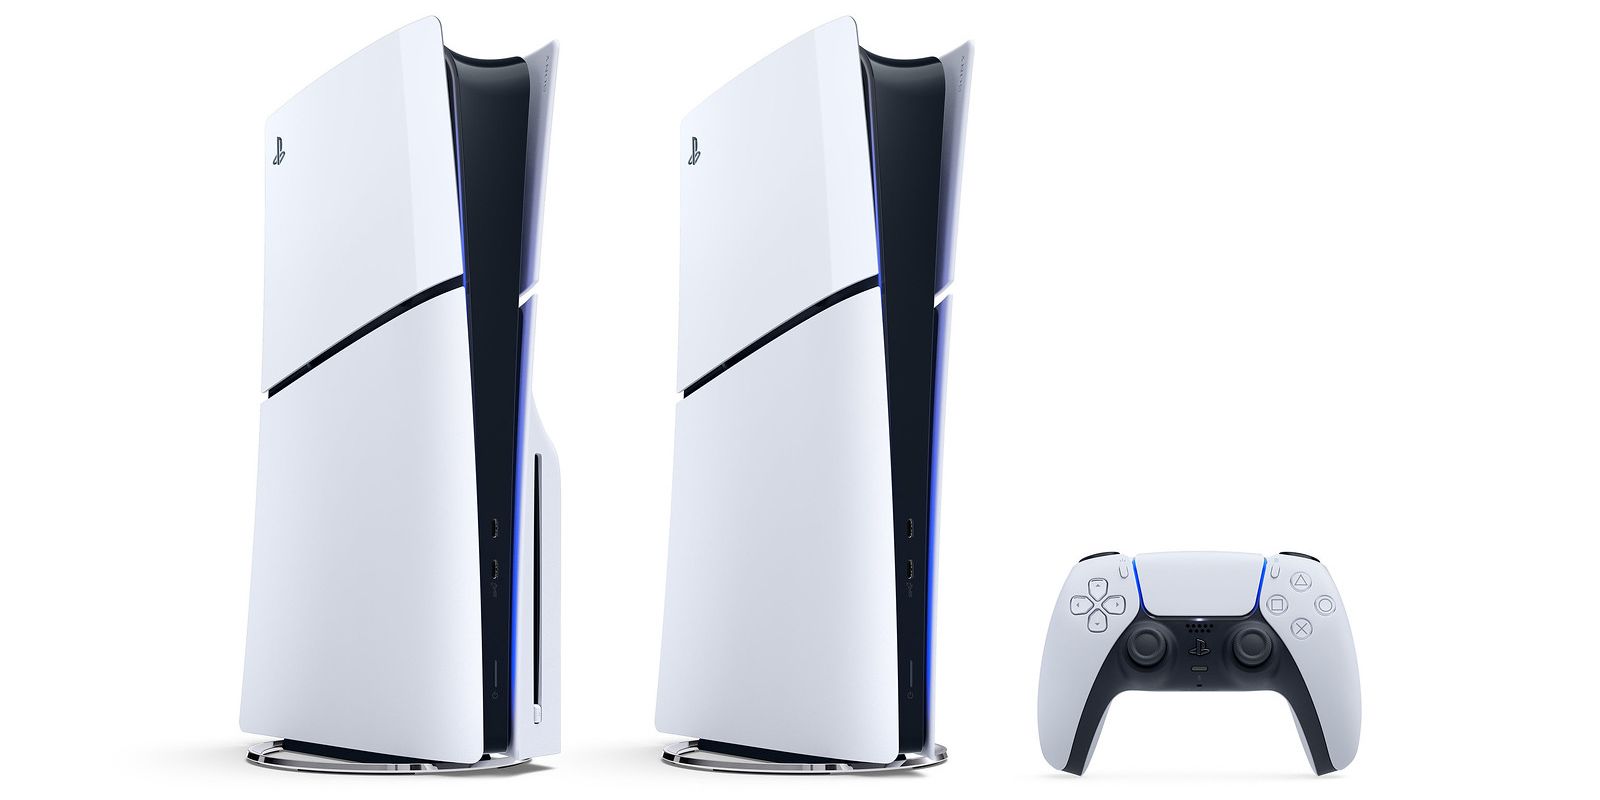 Two new PS5s, one with the detachable disc drive attached, next to a DualSense controller, all on a stark white background.